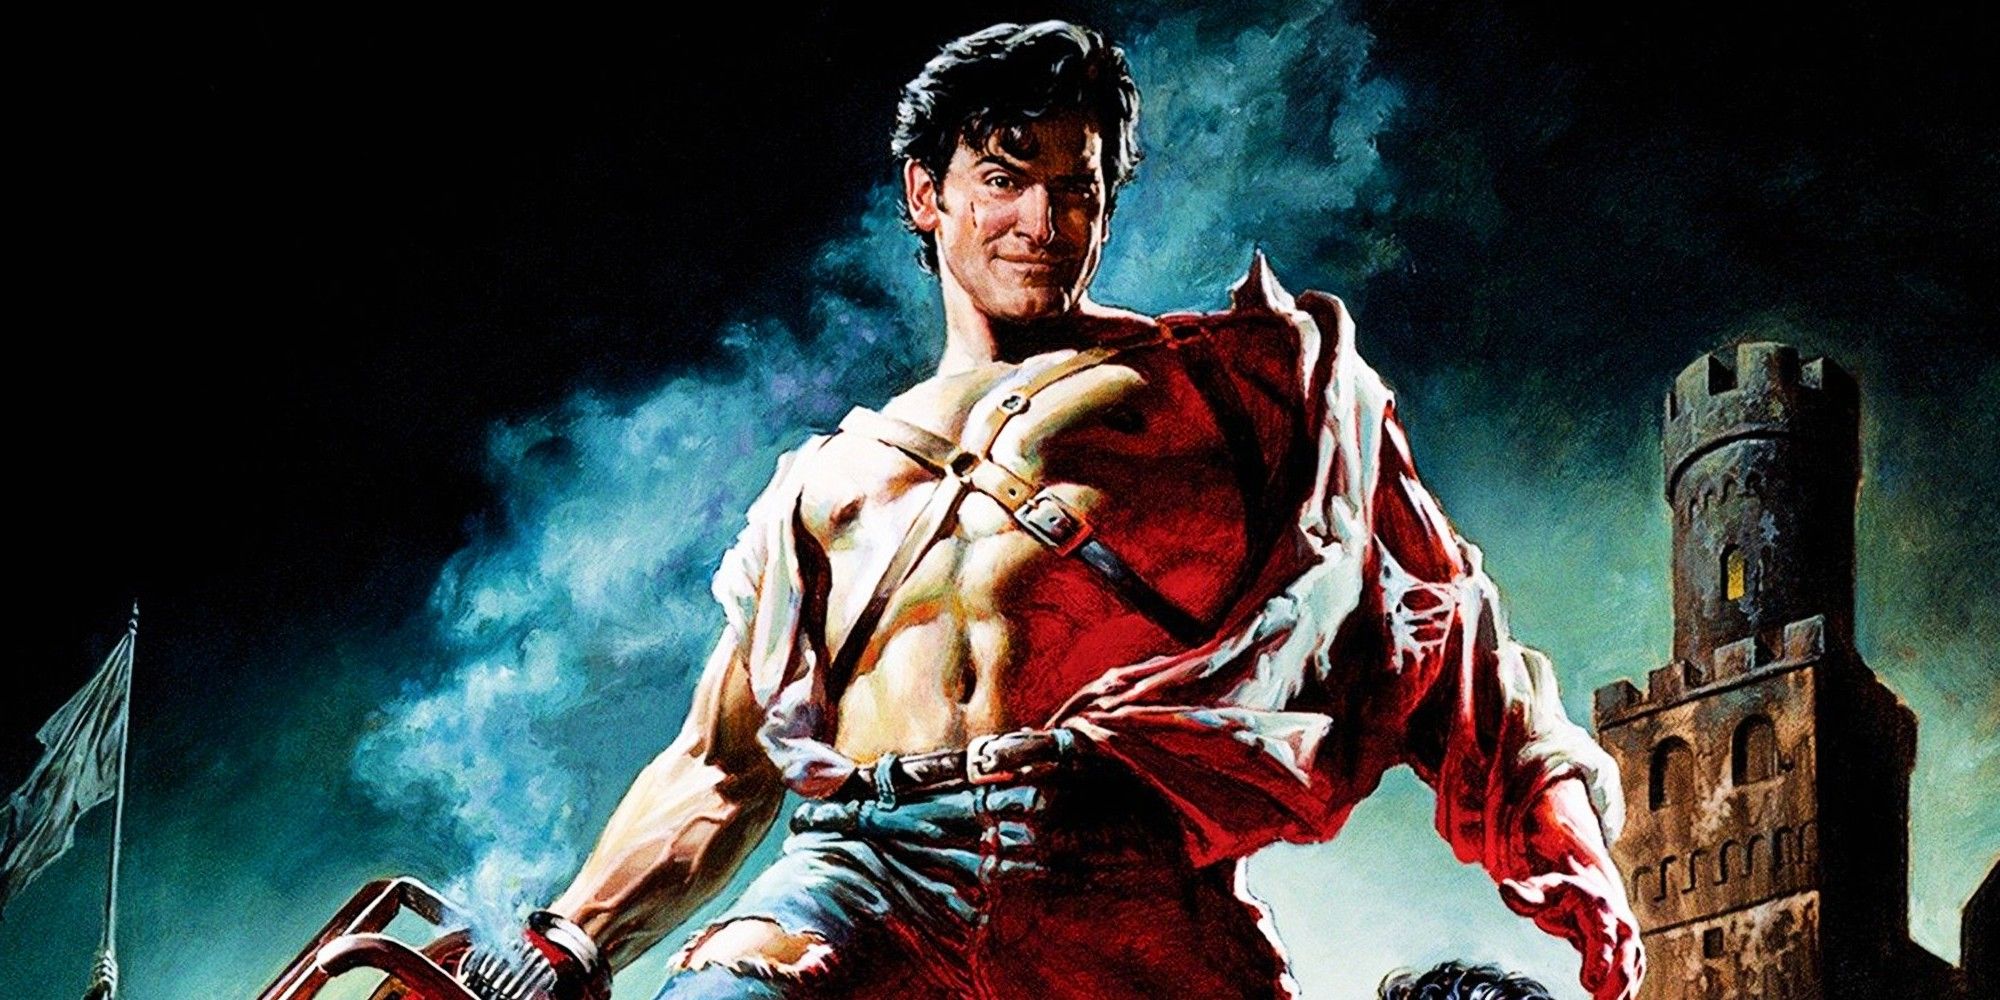 Bruce Campbell as Ash posing confidently in a poster for Army of Darkness 